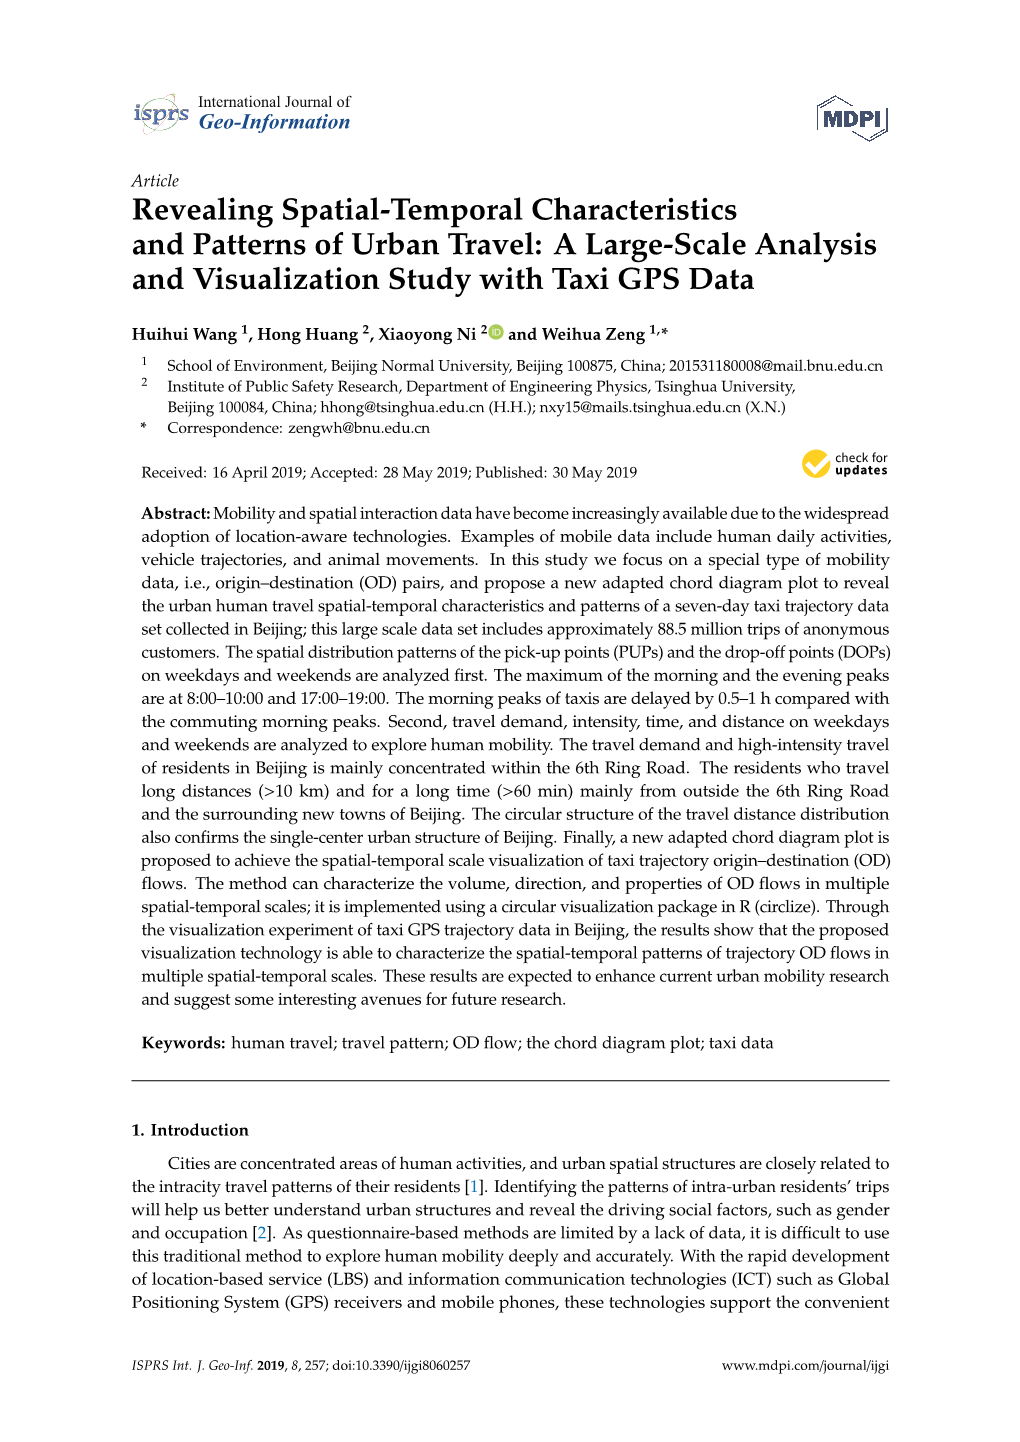 Revealing Spatial-Temporal Characteristics and Patterns of Urban Travel: a Large-Scale Analysis and Visualization Study with Taxi GPS Data